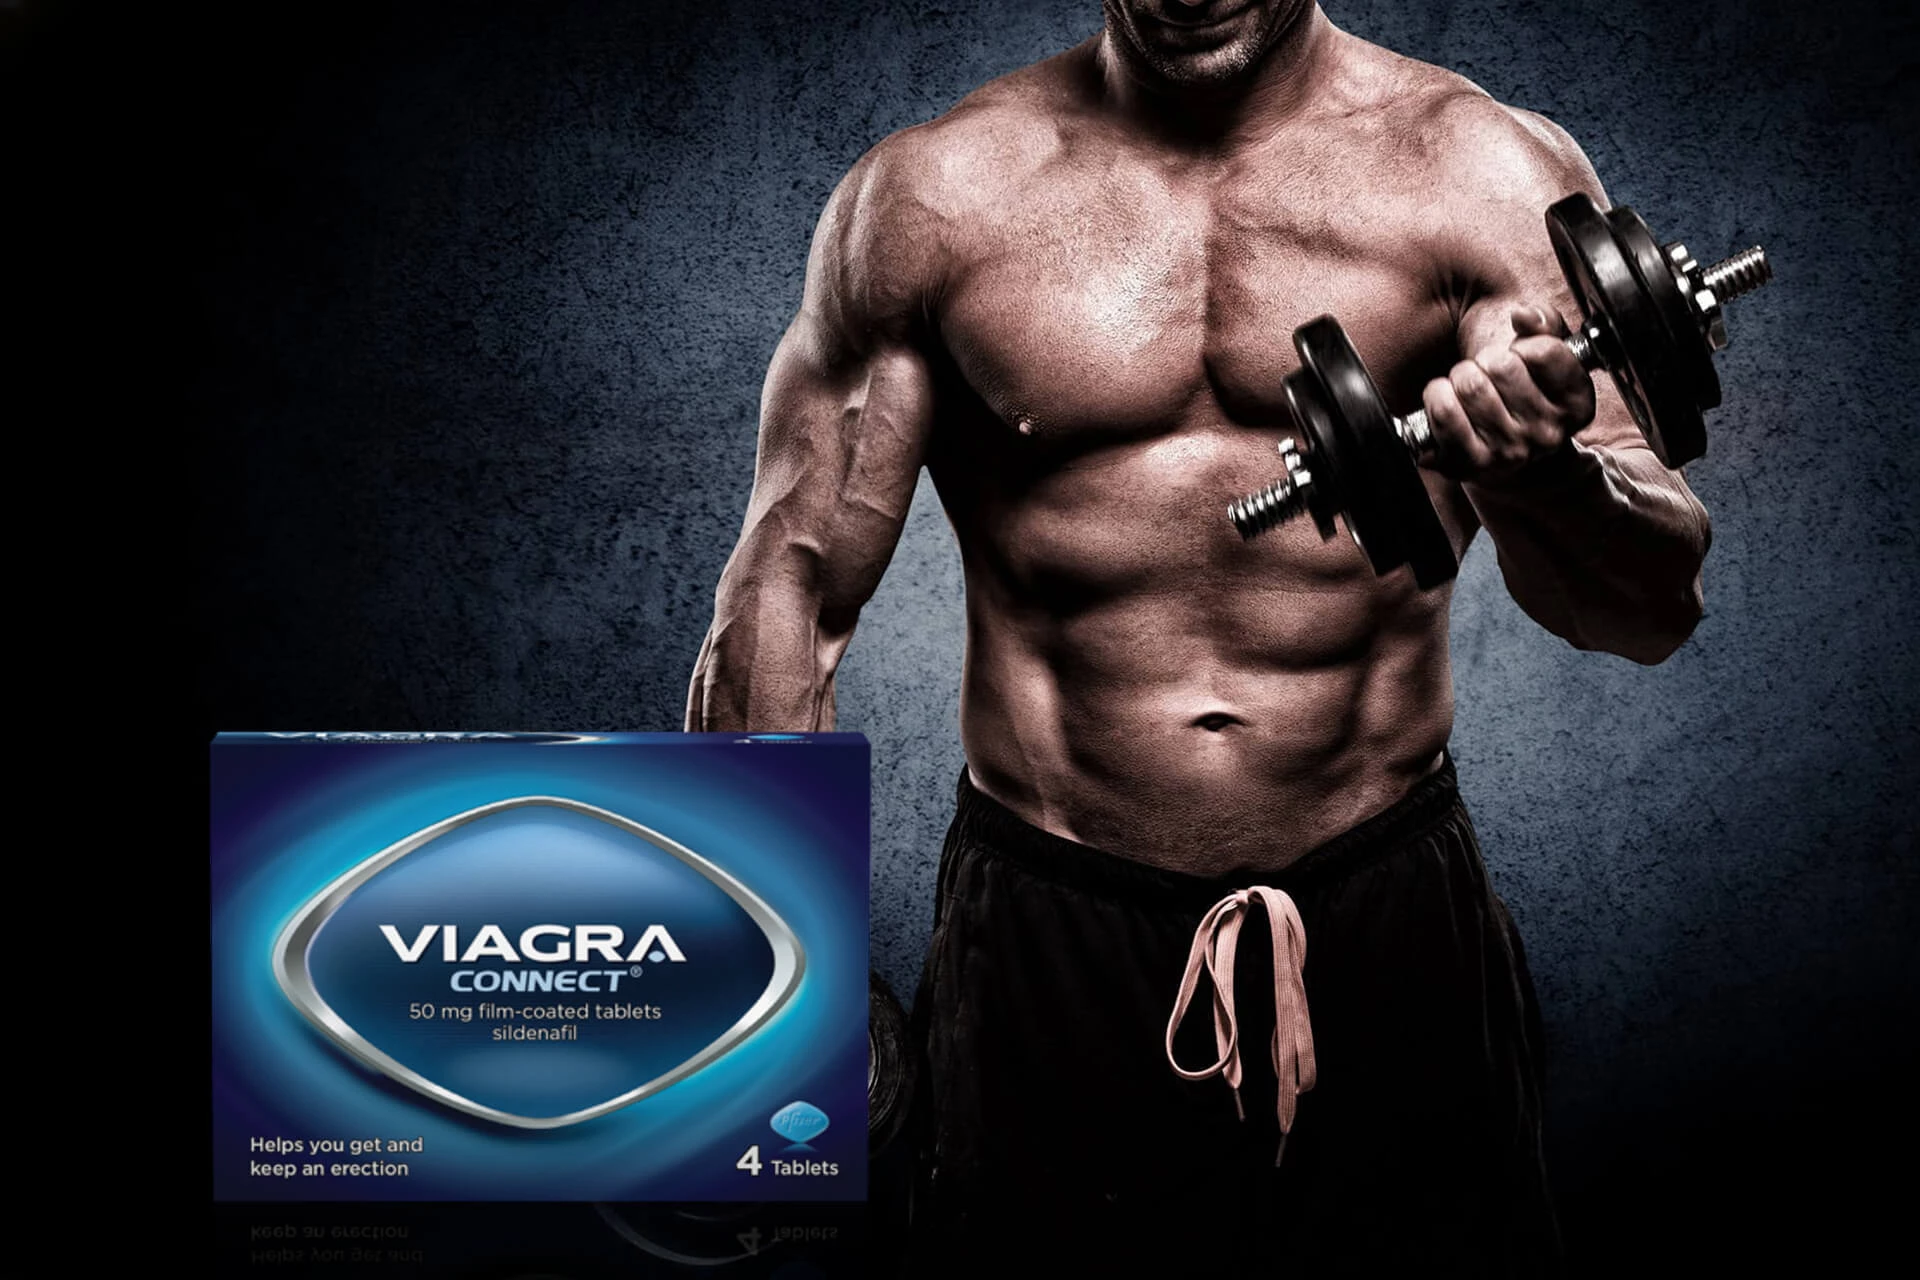 Viagra and Sports